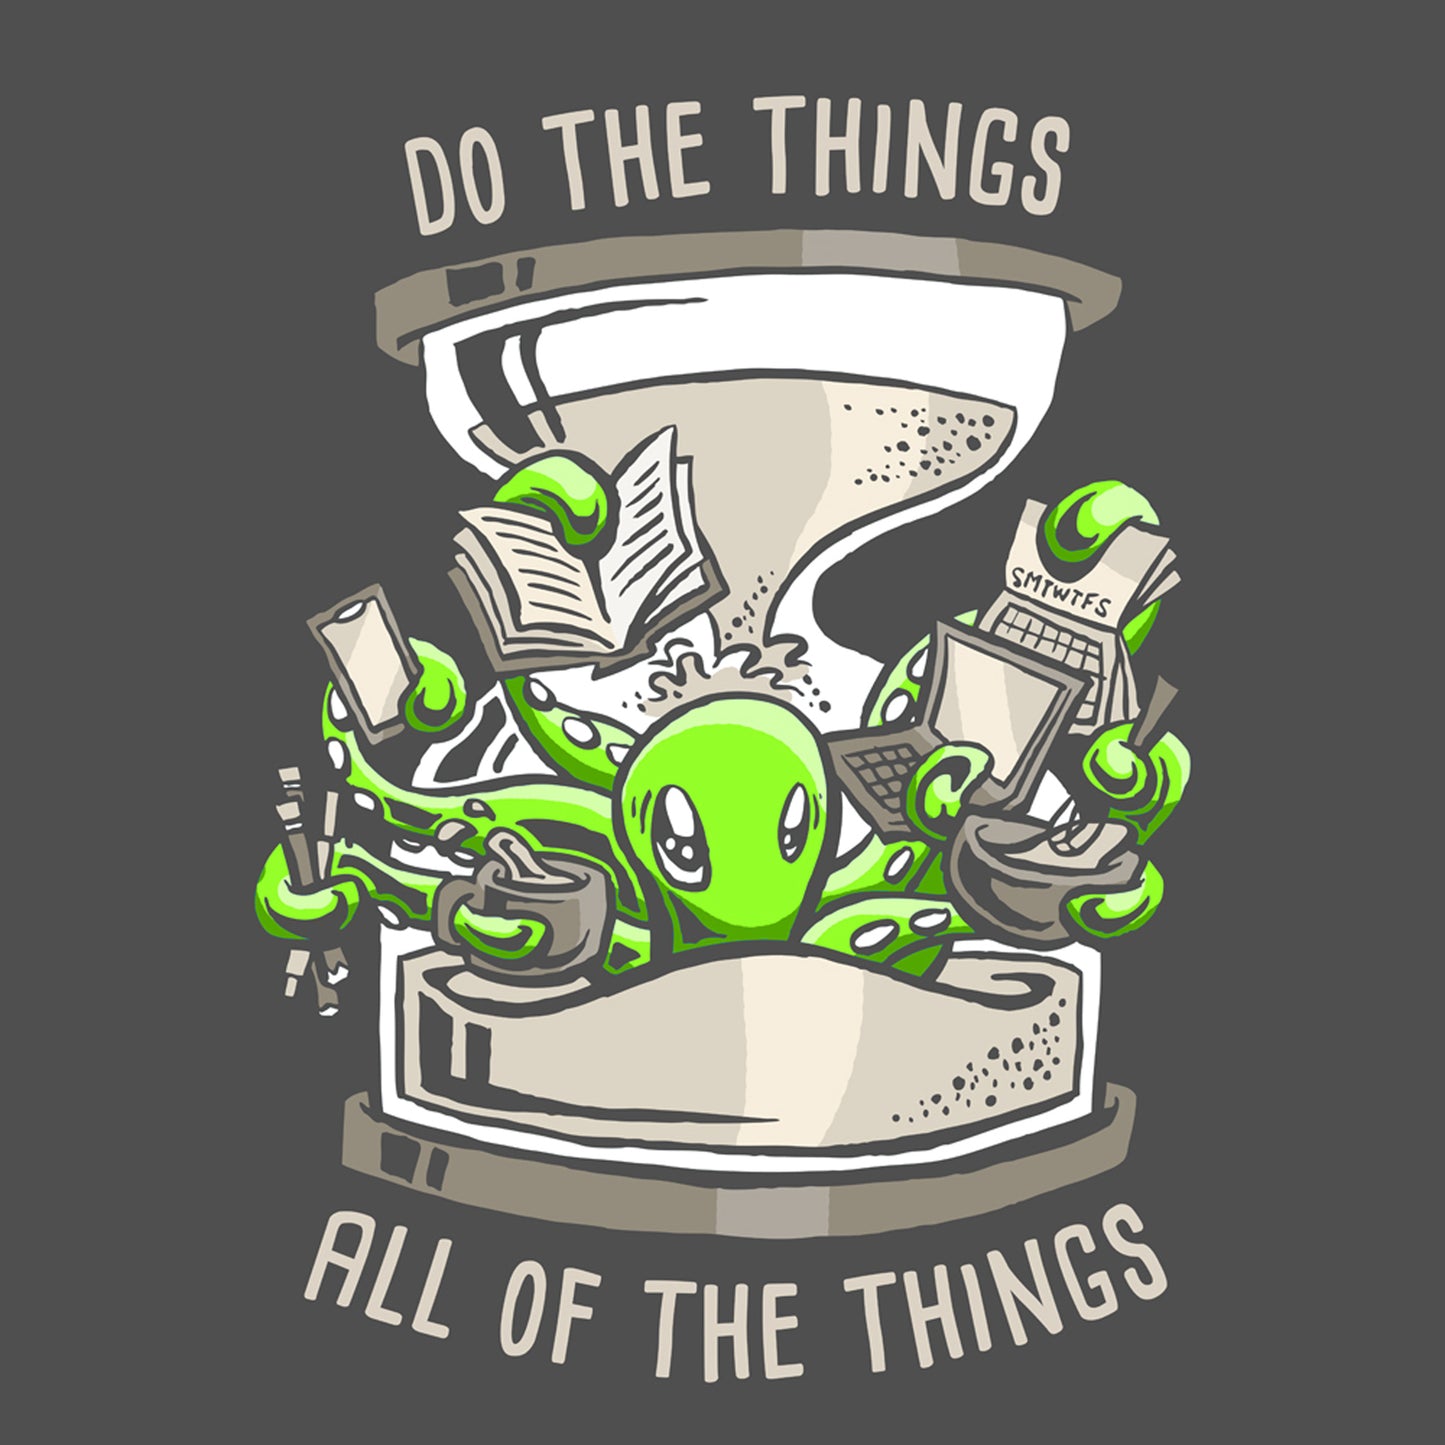 T-shirt: All The Things - Zeek the Octopus